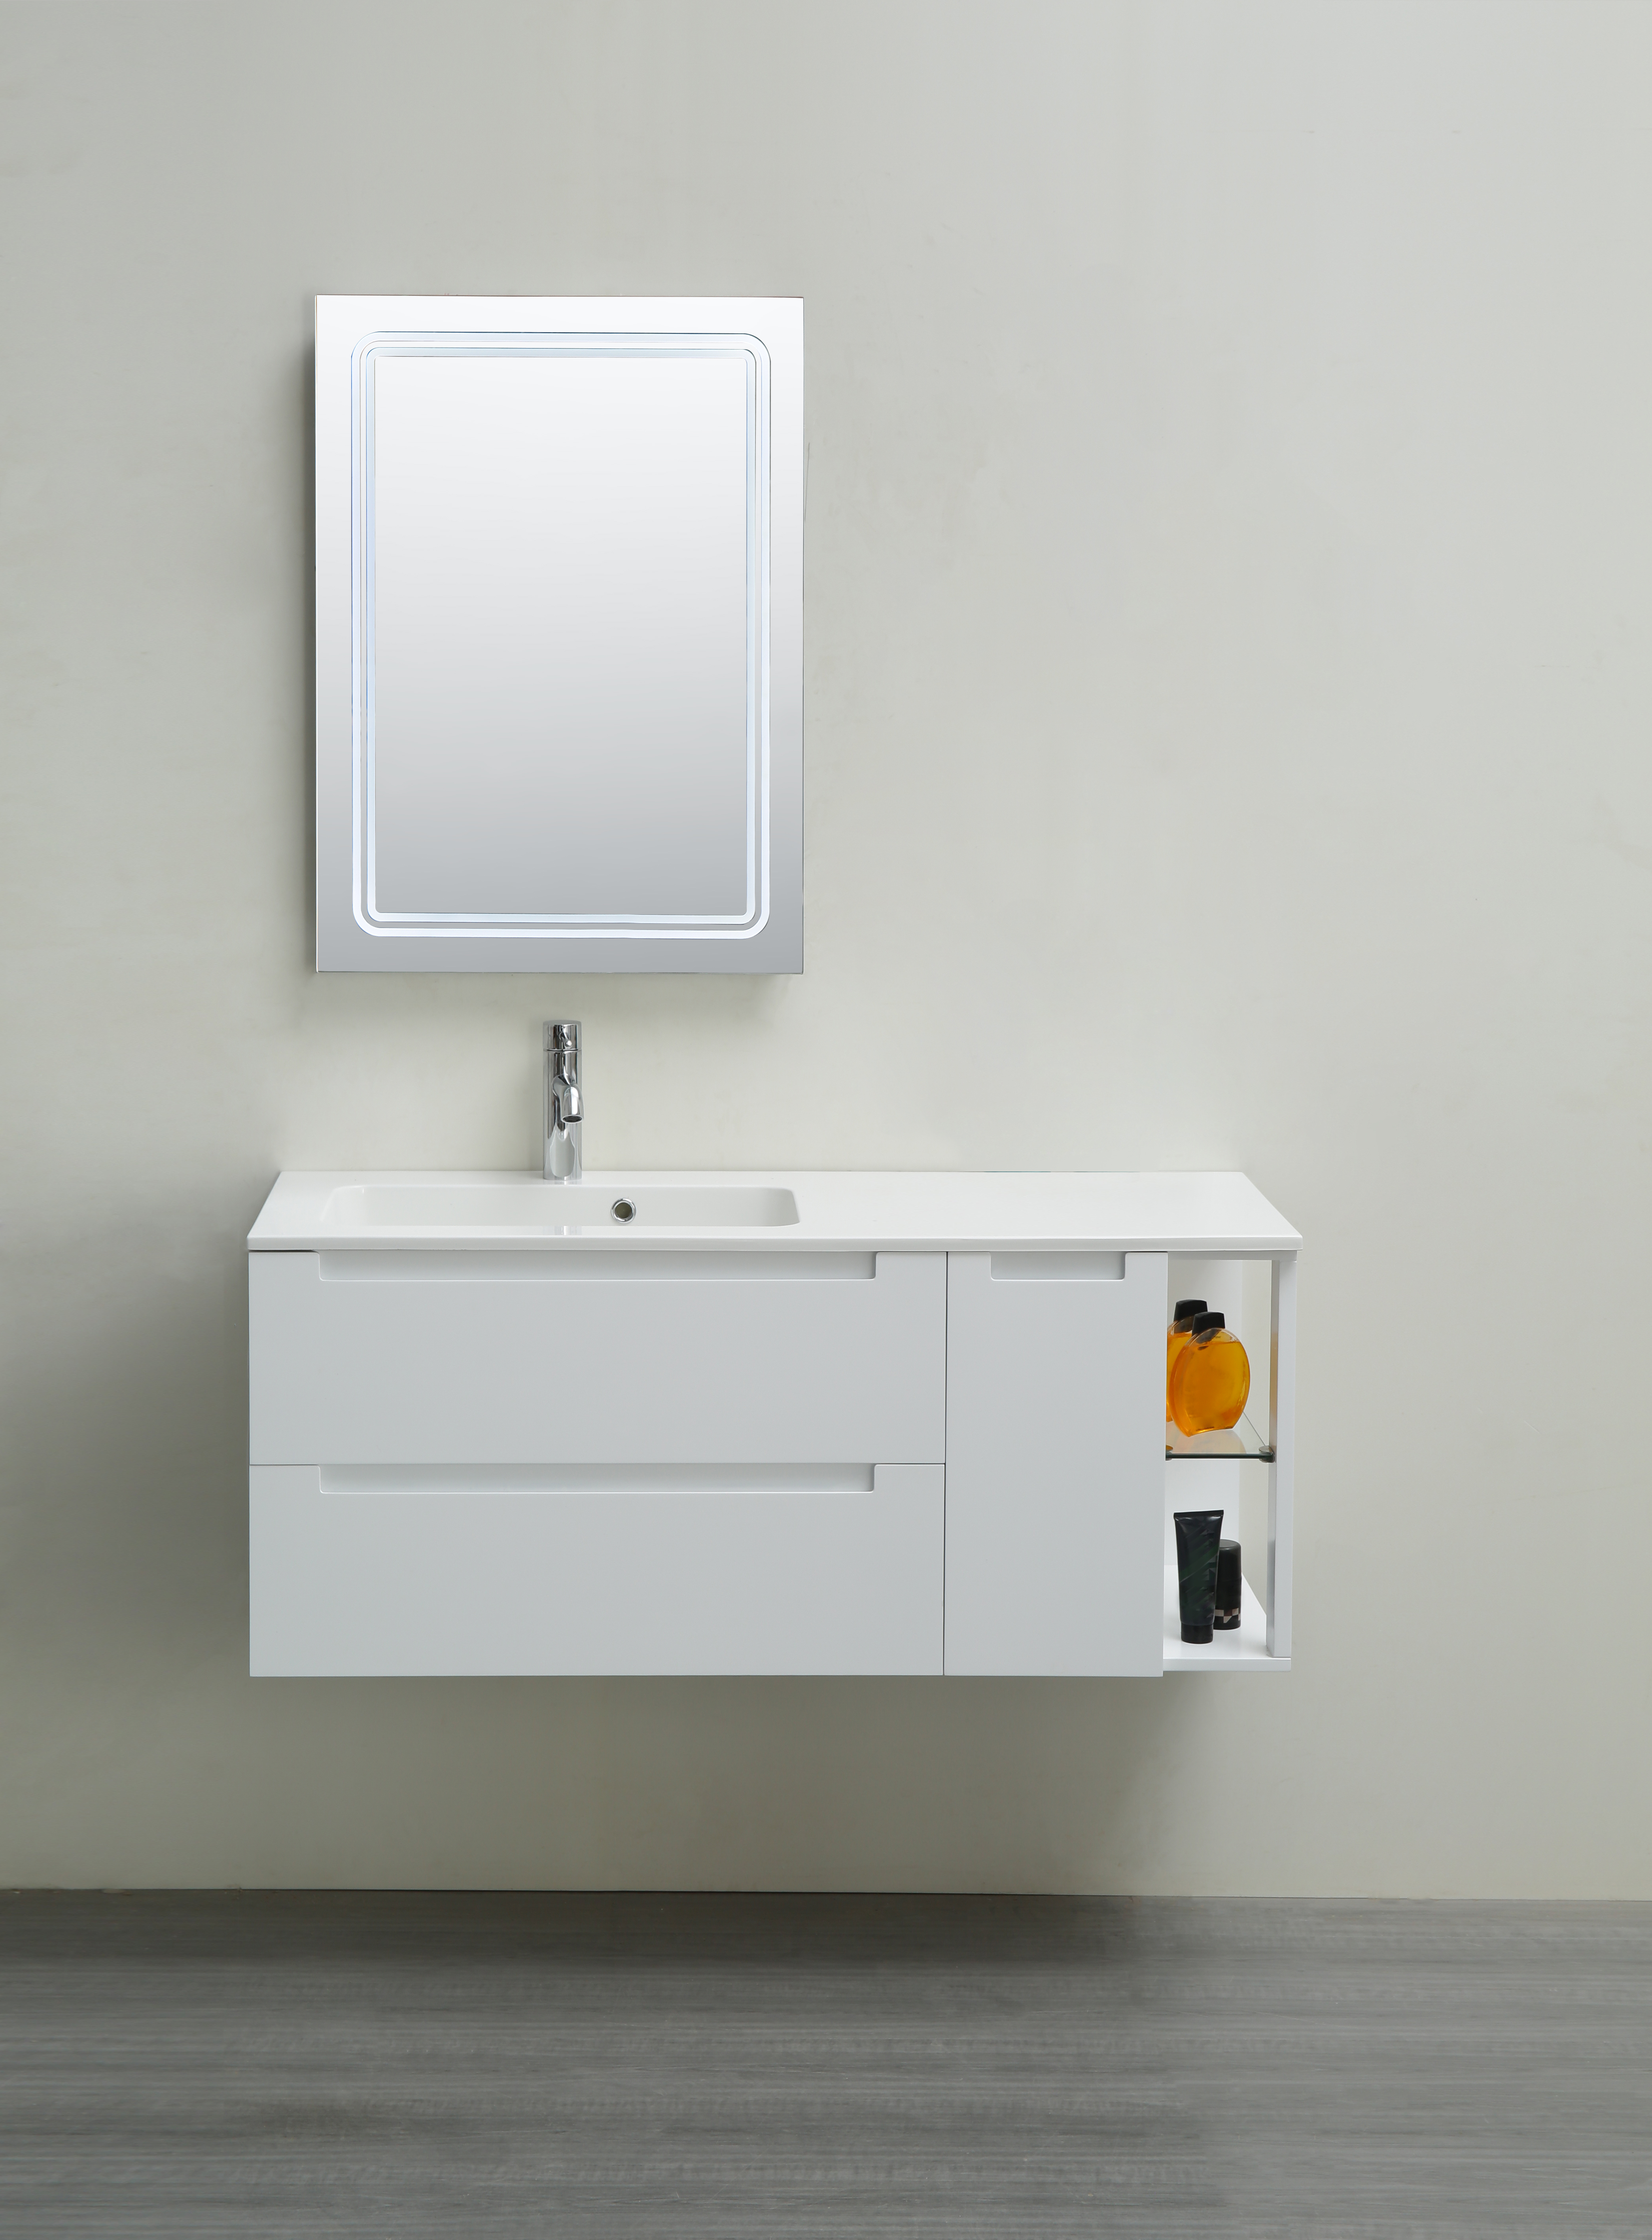 Wall Mounted Bathroom Cabinet White Color With 2 Doors and 2 Drawers